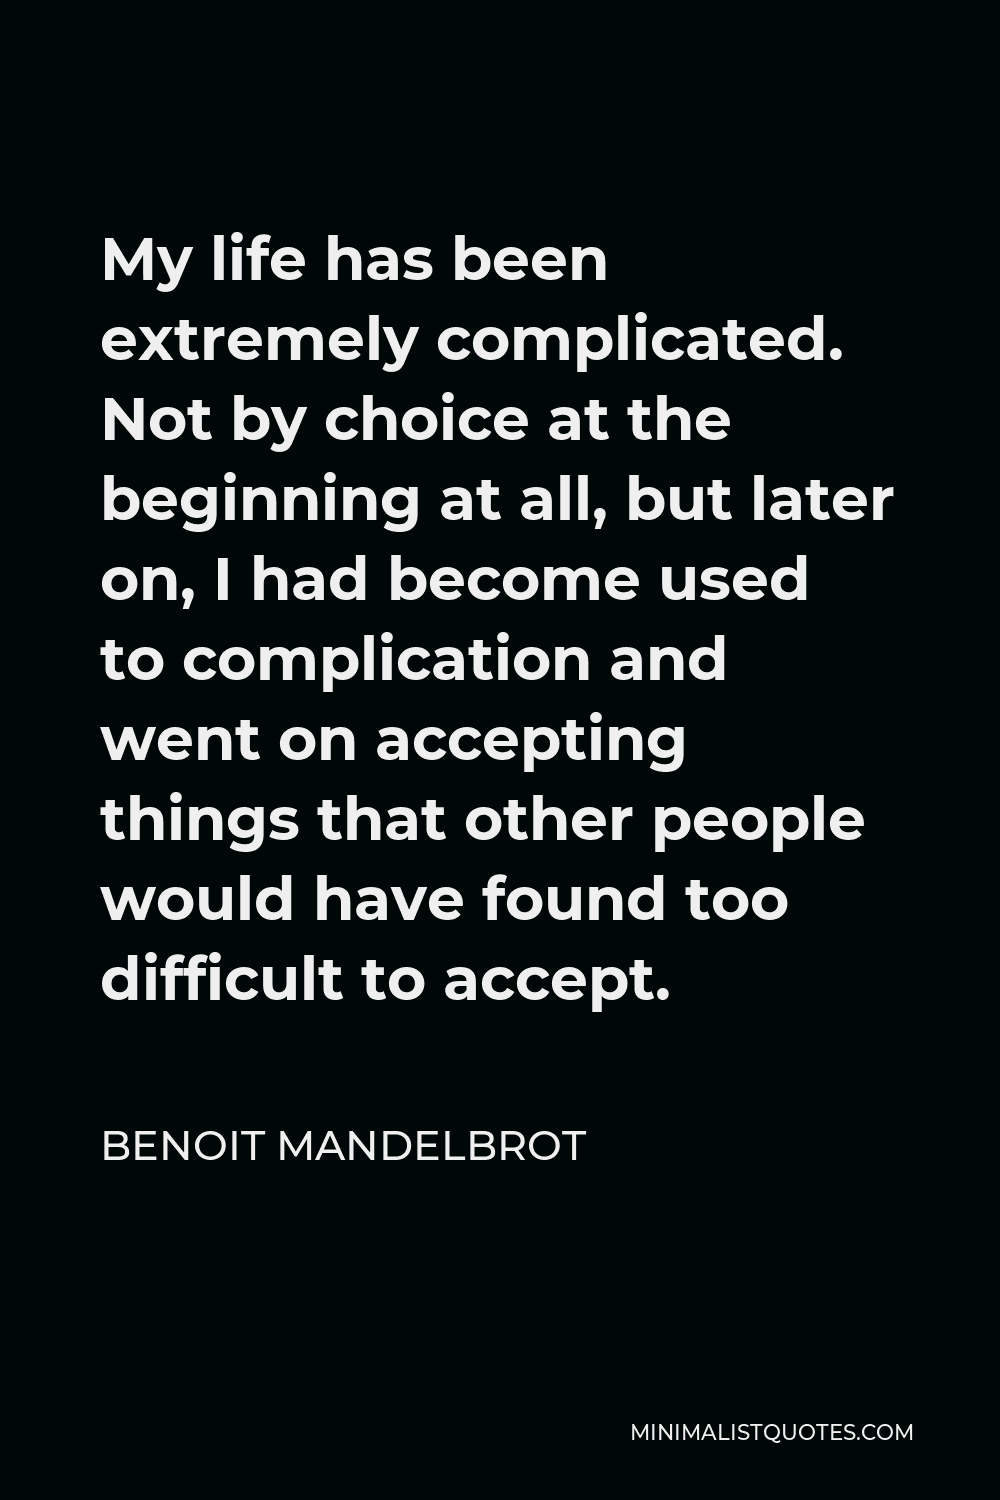 Benoit Mandelbrot Quote - My life has been extremely complicated. Not by choice at the beginning at all, but later on, I had become used to complication and went on accepting things that other people would have found too difficult to accept.